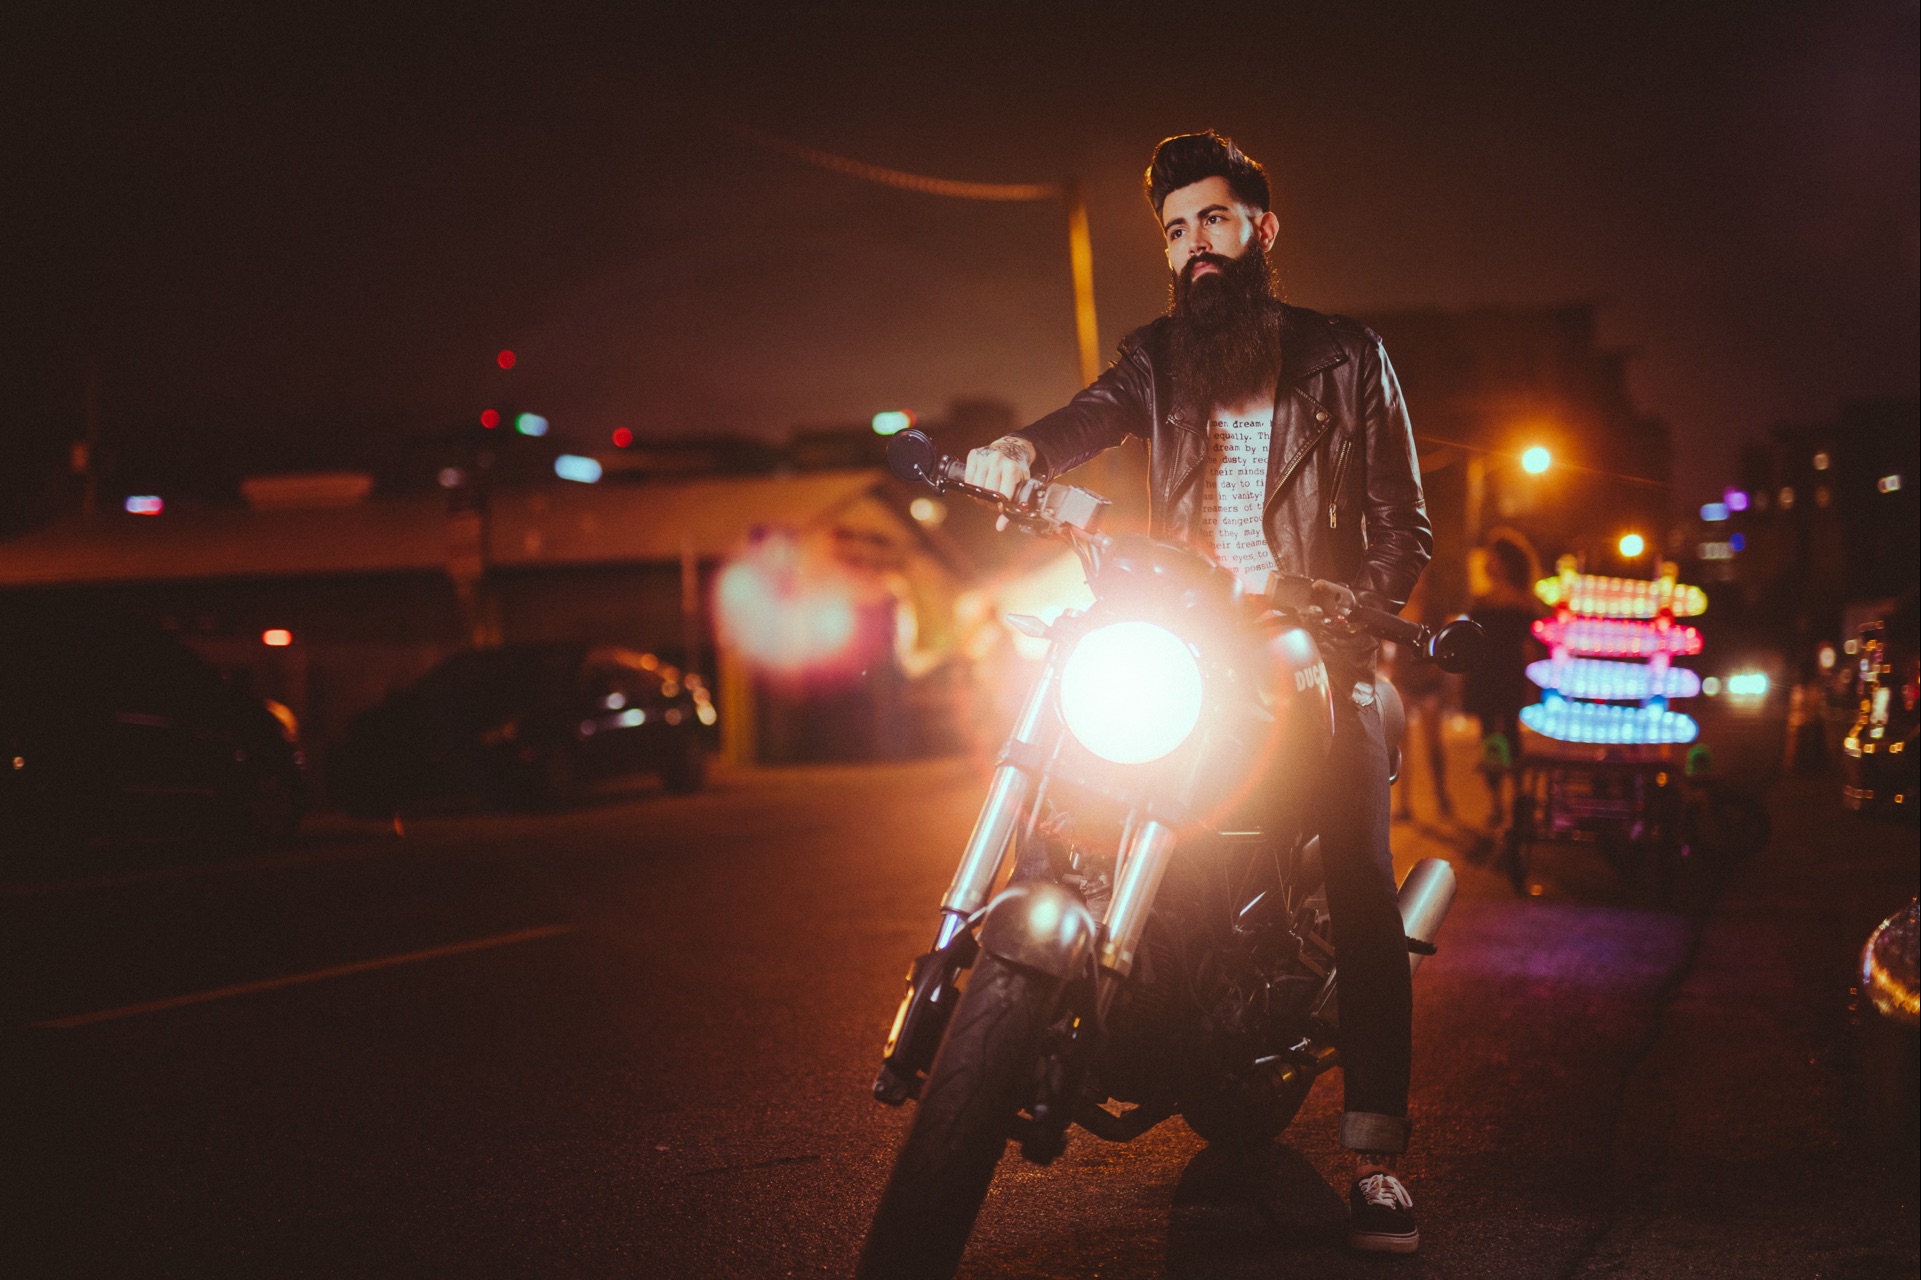 IU C&I Studios Page C&I Studios Blog Man with a long beard wearing a leather jacket on a motorcycle at night with headlight on waiting on the street